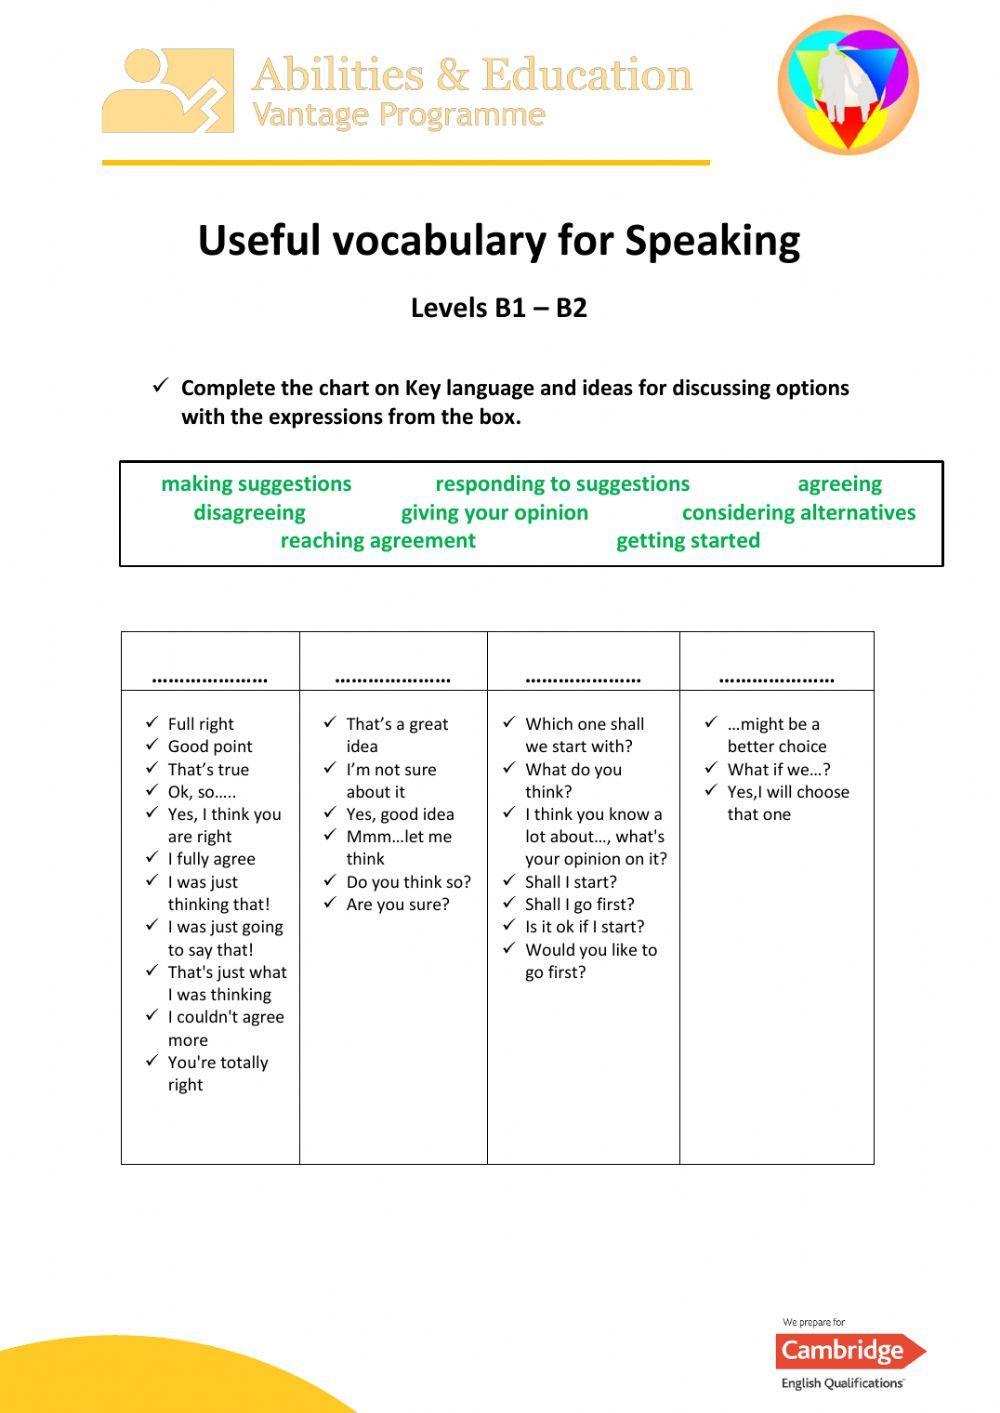 Useful expressions for Speaking discussion - Levels B1 - B2 worksheet |  Live Worksheets